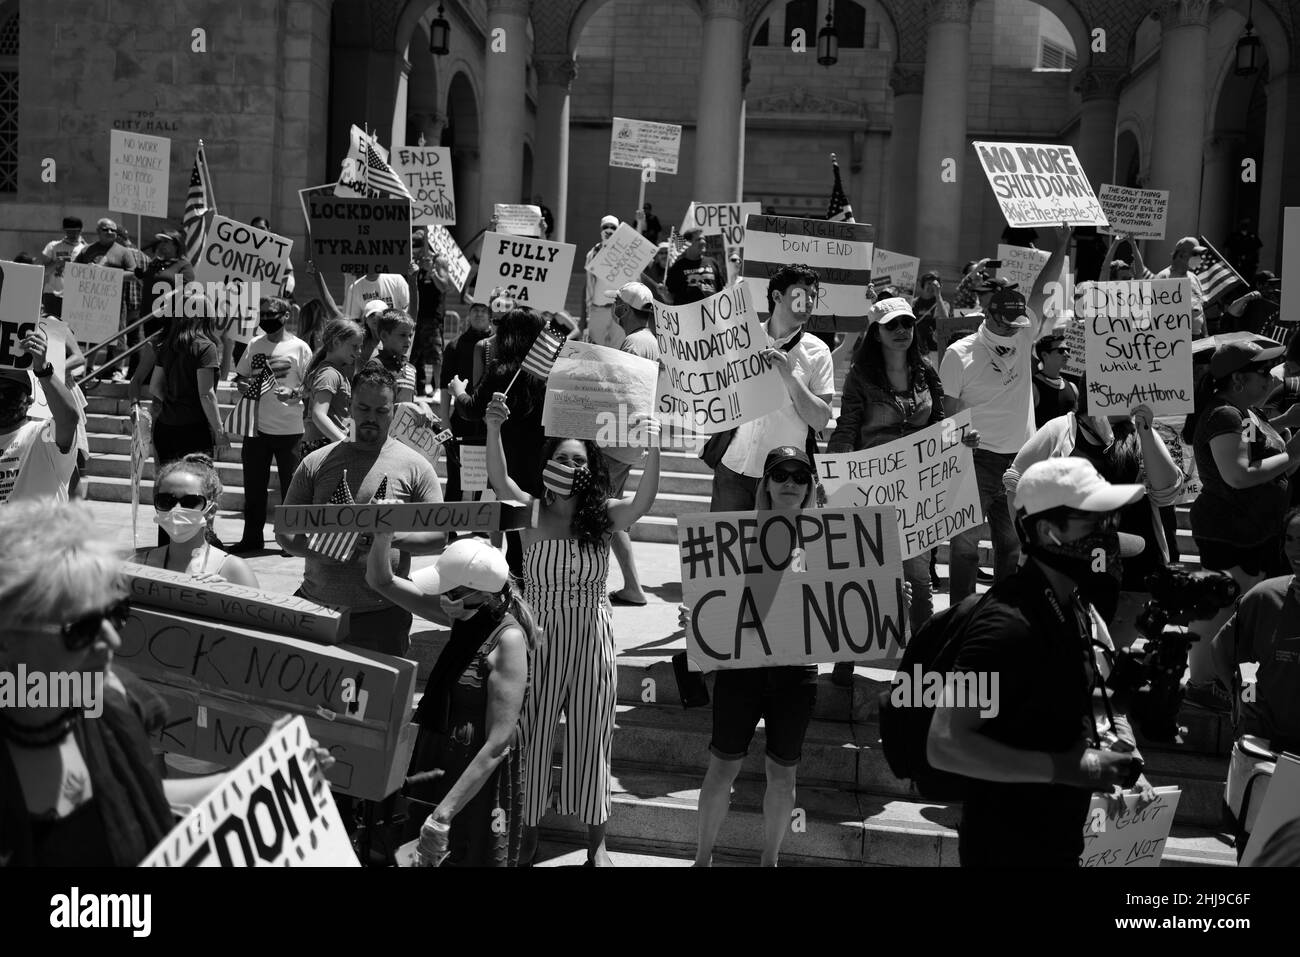 Covid protest in Los Angeles odd times in world history with Covid-19 people are not happy and police are out in force Stock Photo